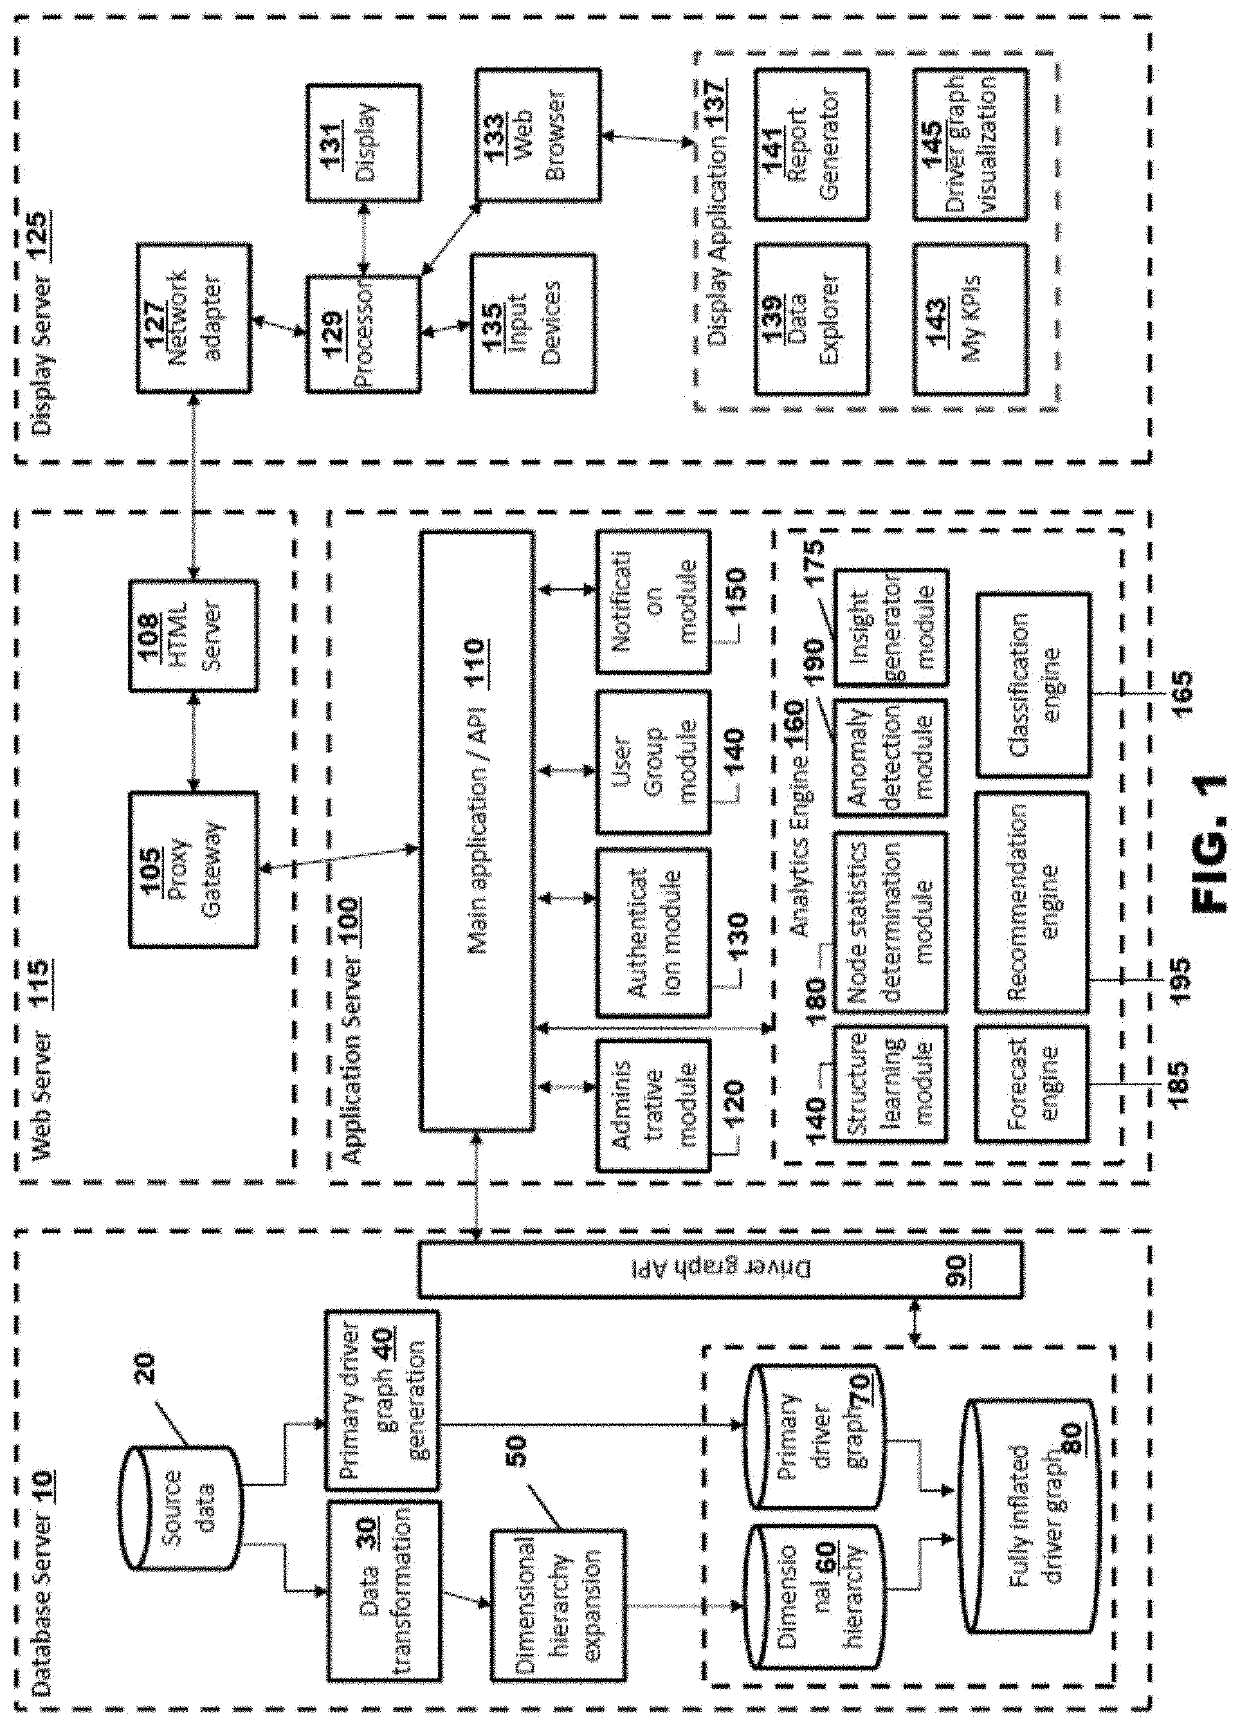 Systems and methods for dynamic ingestion and inflation of data